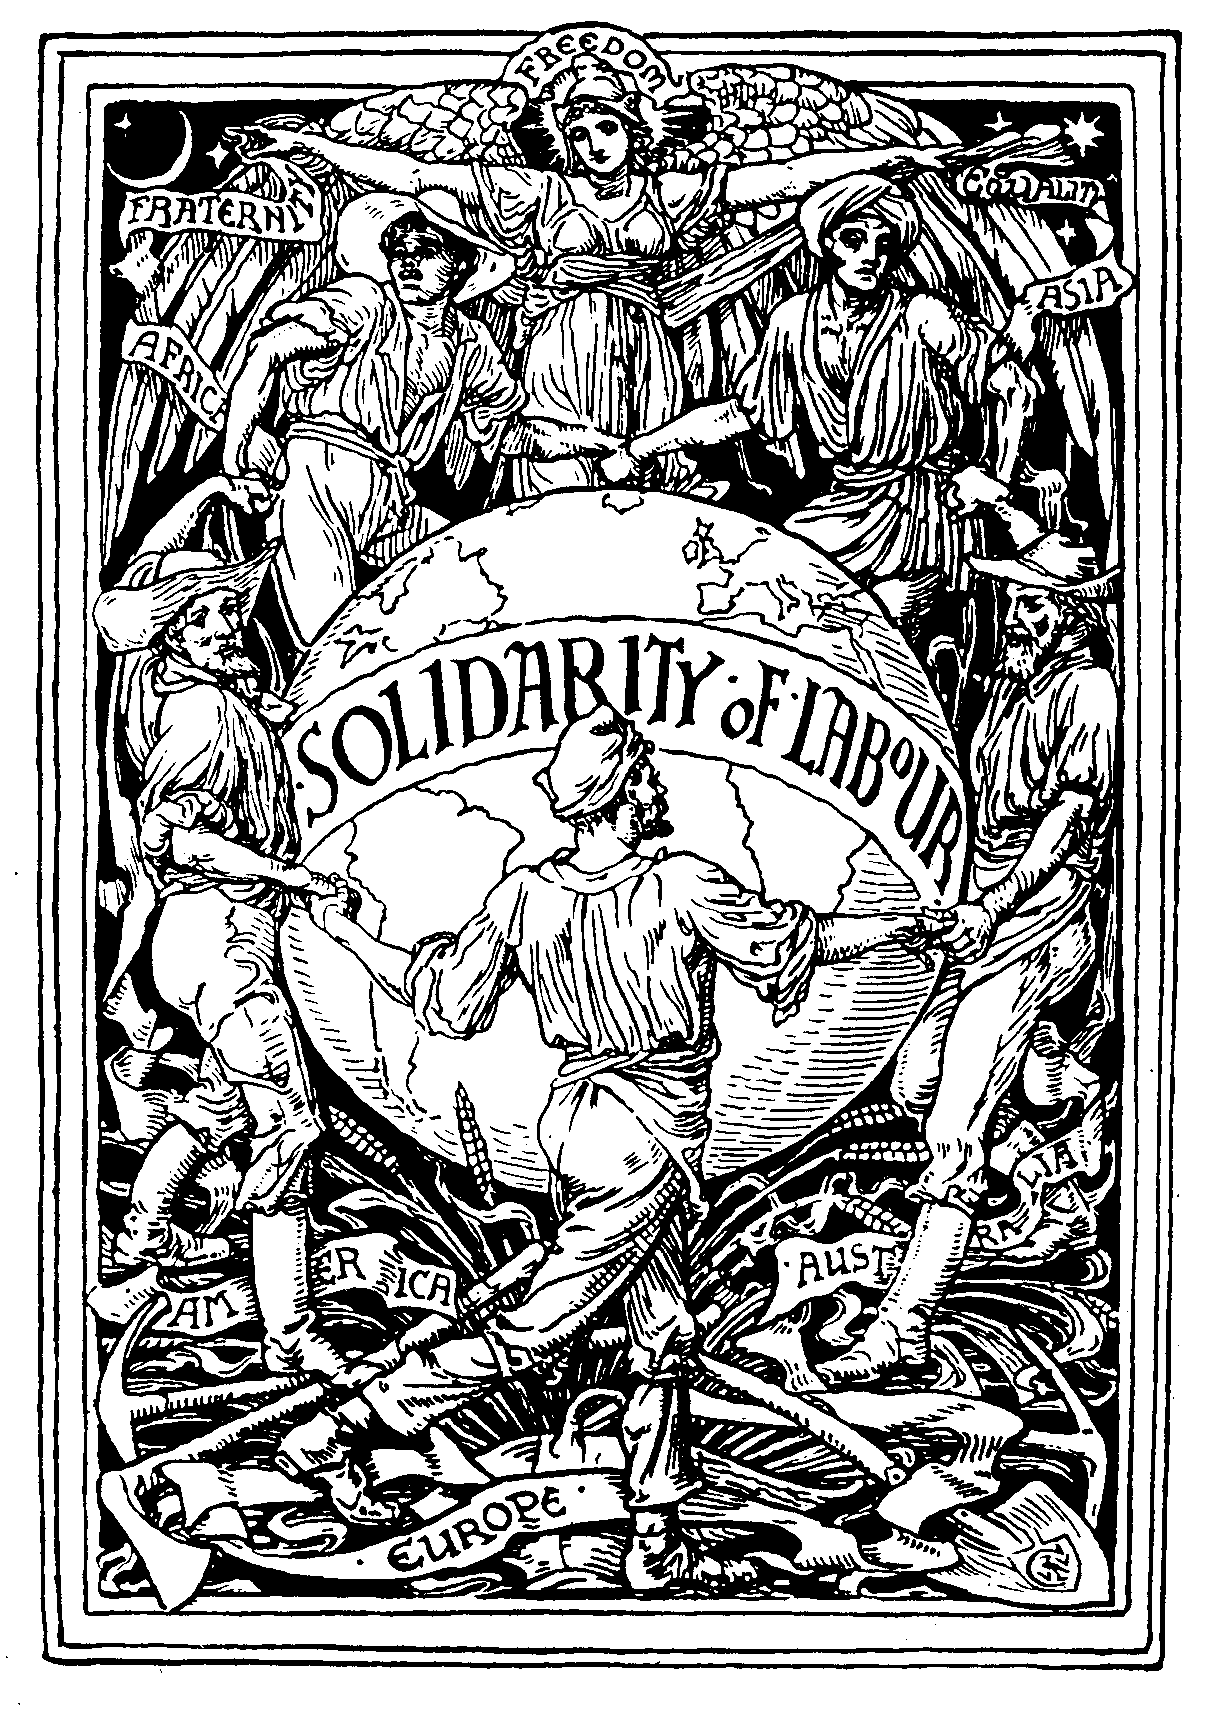 IWW Image : Solidarity of Labour